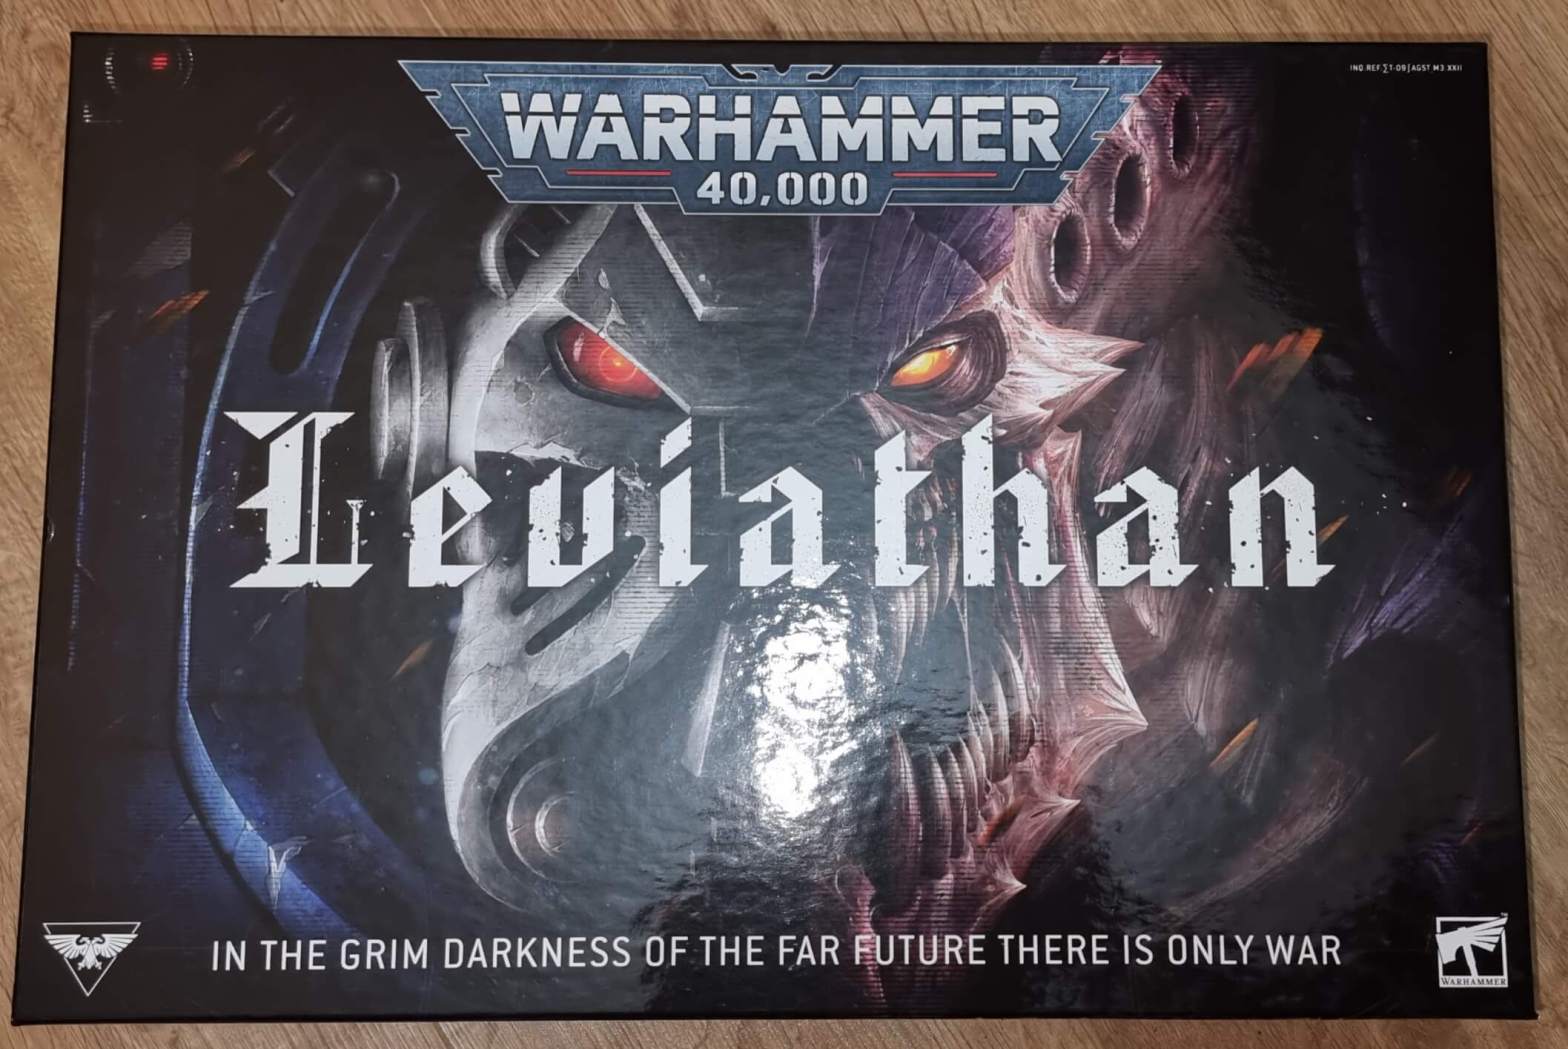 More Warhammer 40K Leviathan sets have been made than any other Warhammer  box, ever